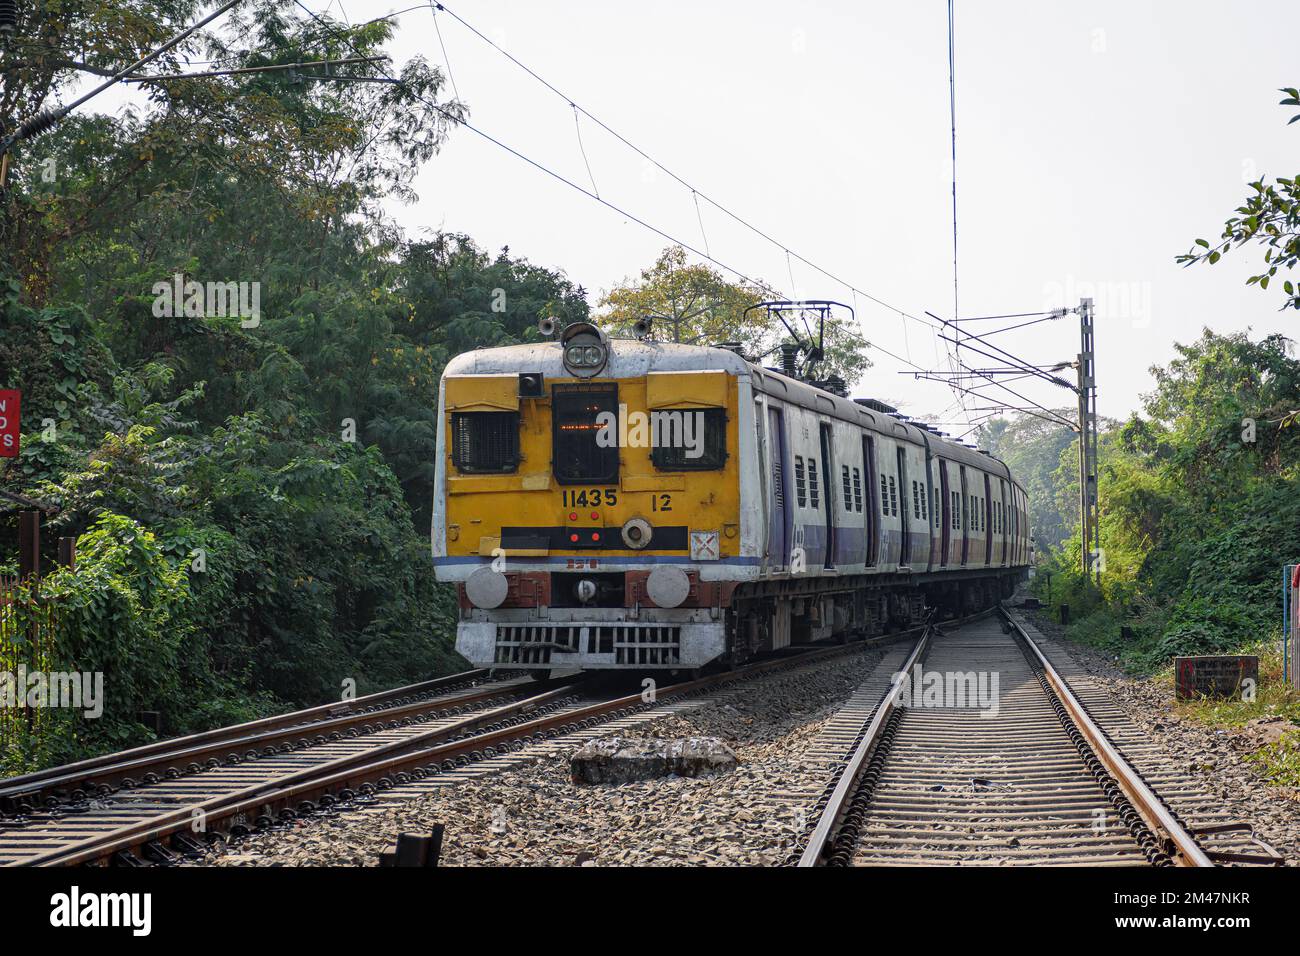 A view of local train of Eastern Railway in Indian Railway system running in city Kolkata, West Bengal, India Stock Photo